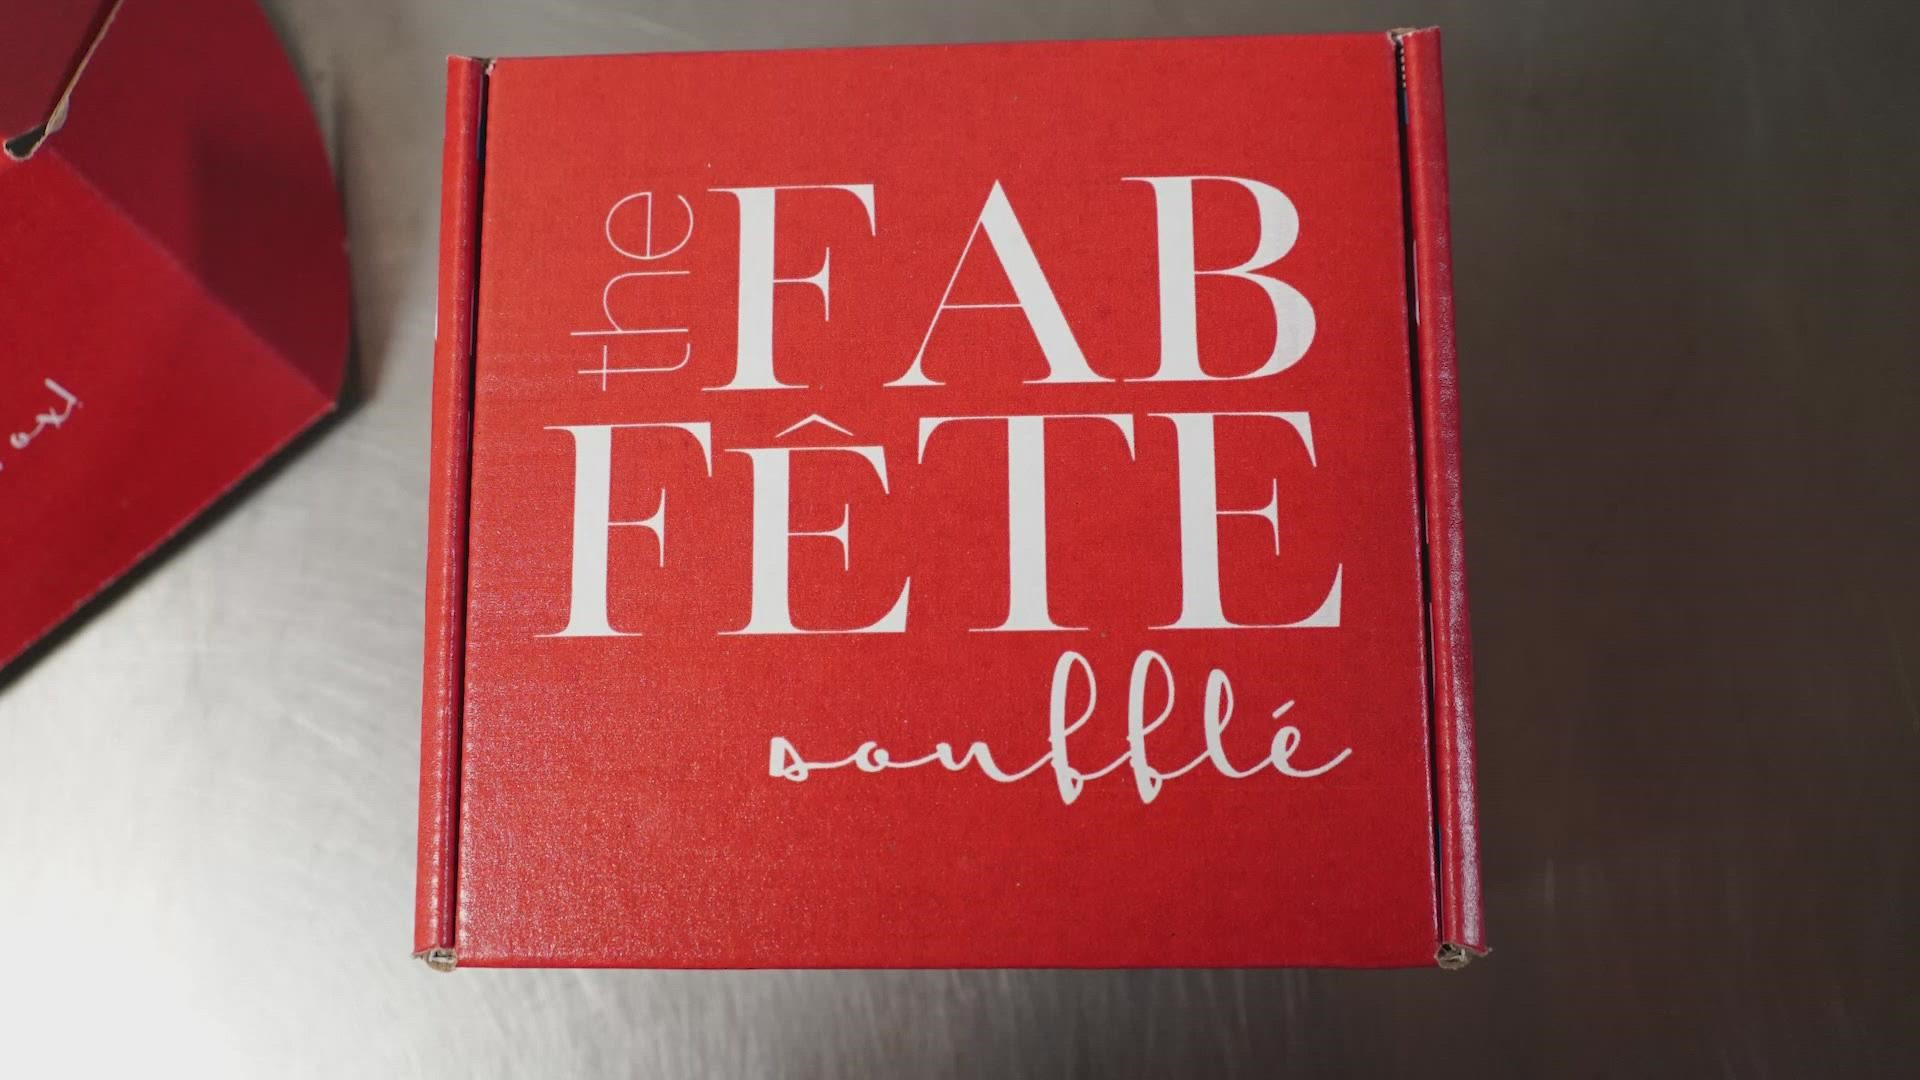 The Fab Fête is dishing out soufflés that are nearly impossible to mess up. They're so good, they even were named as one of Oprah's Favorite Things.